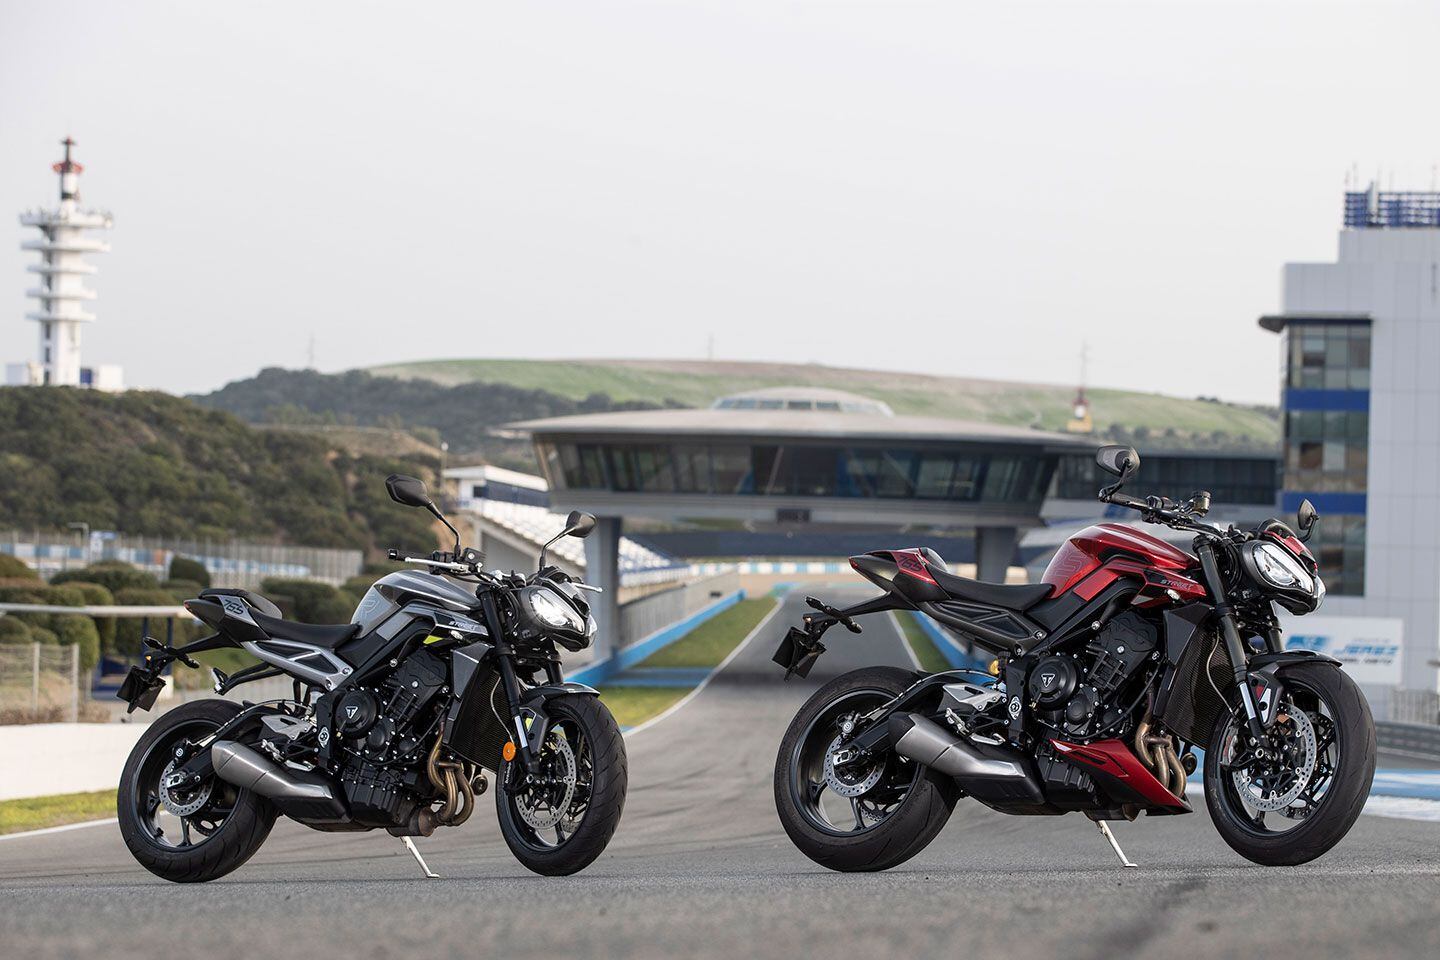 Street Triple 765 R (left) and Street Triple 765 RS (right). Notice the RS’s bar-end mirrors, bellypan, and seat cowl. RS model uses higher-spec suspension and brakes, while also benefiting from a higher engine tune.